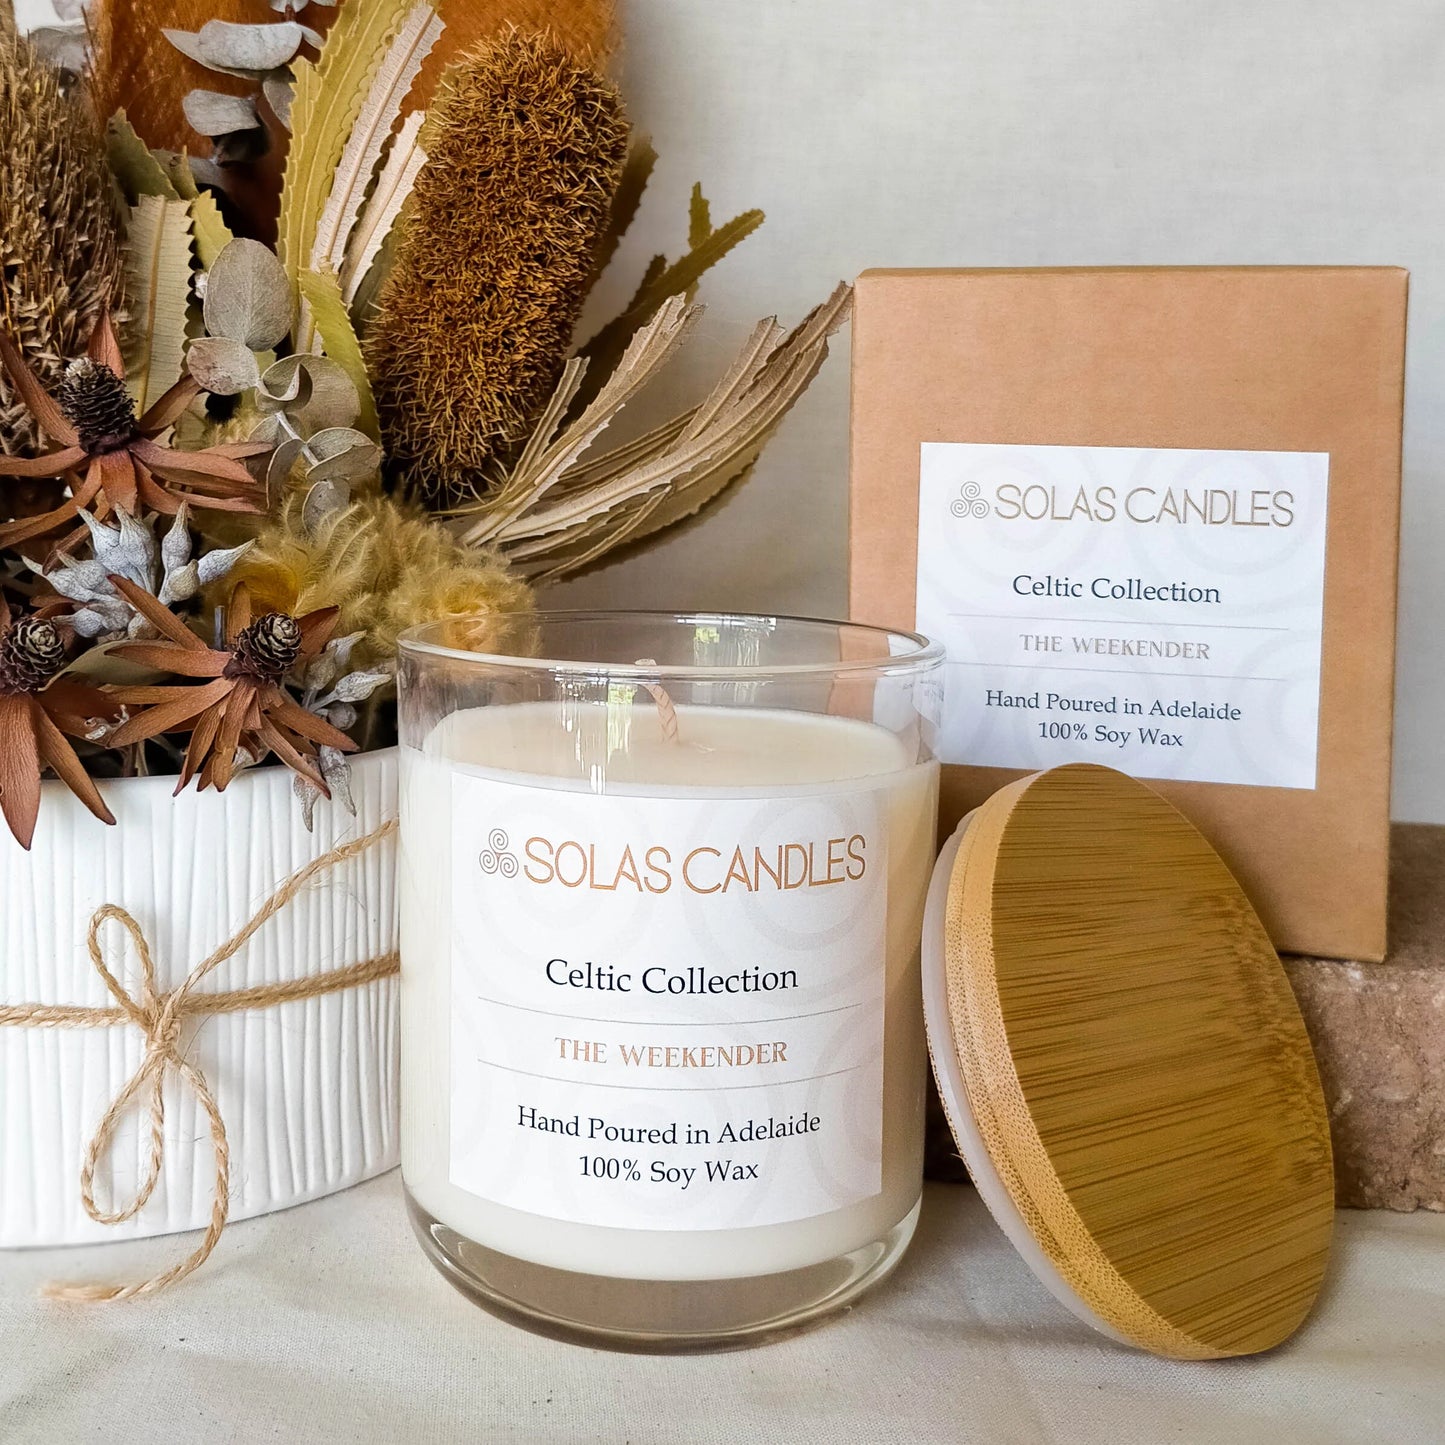 Solas Candles - Celtic Collection, The Weekender